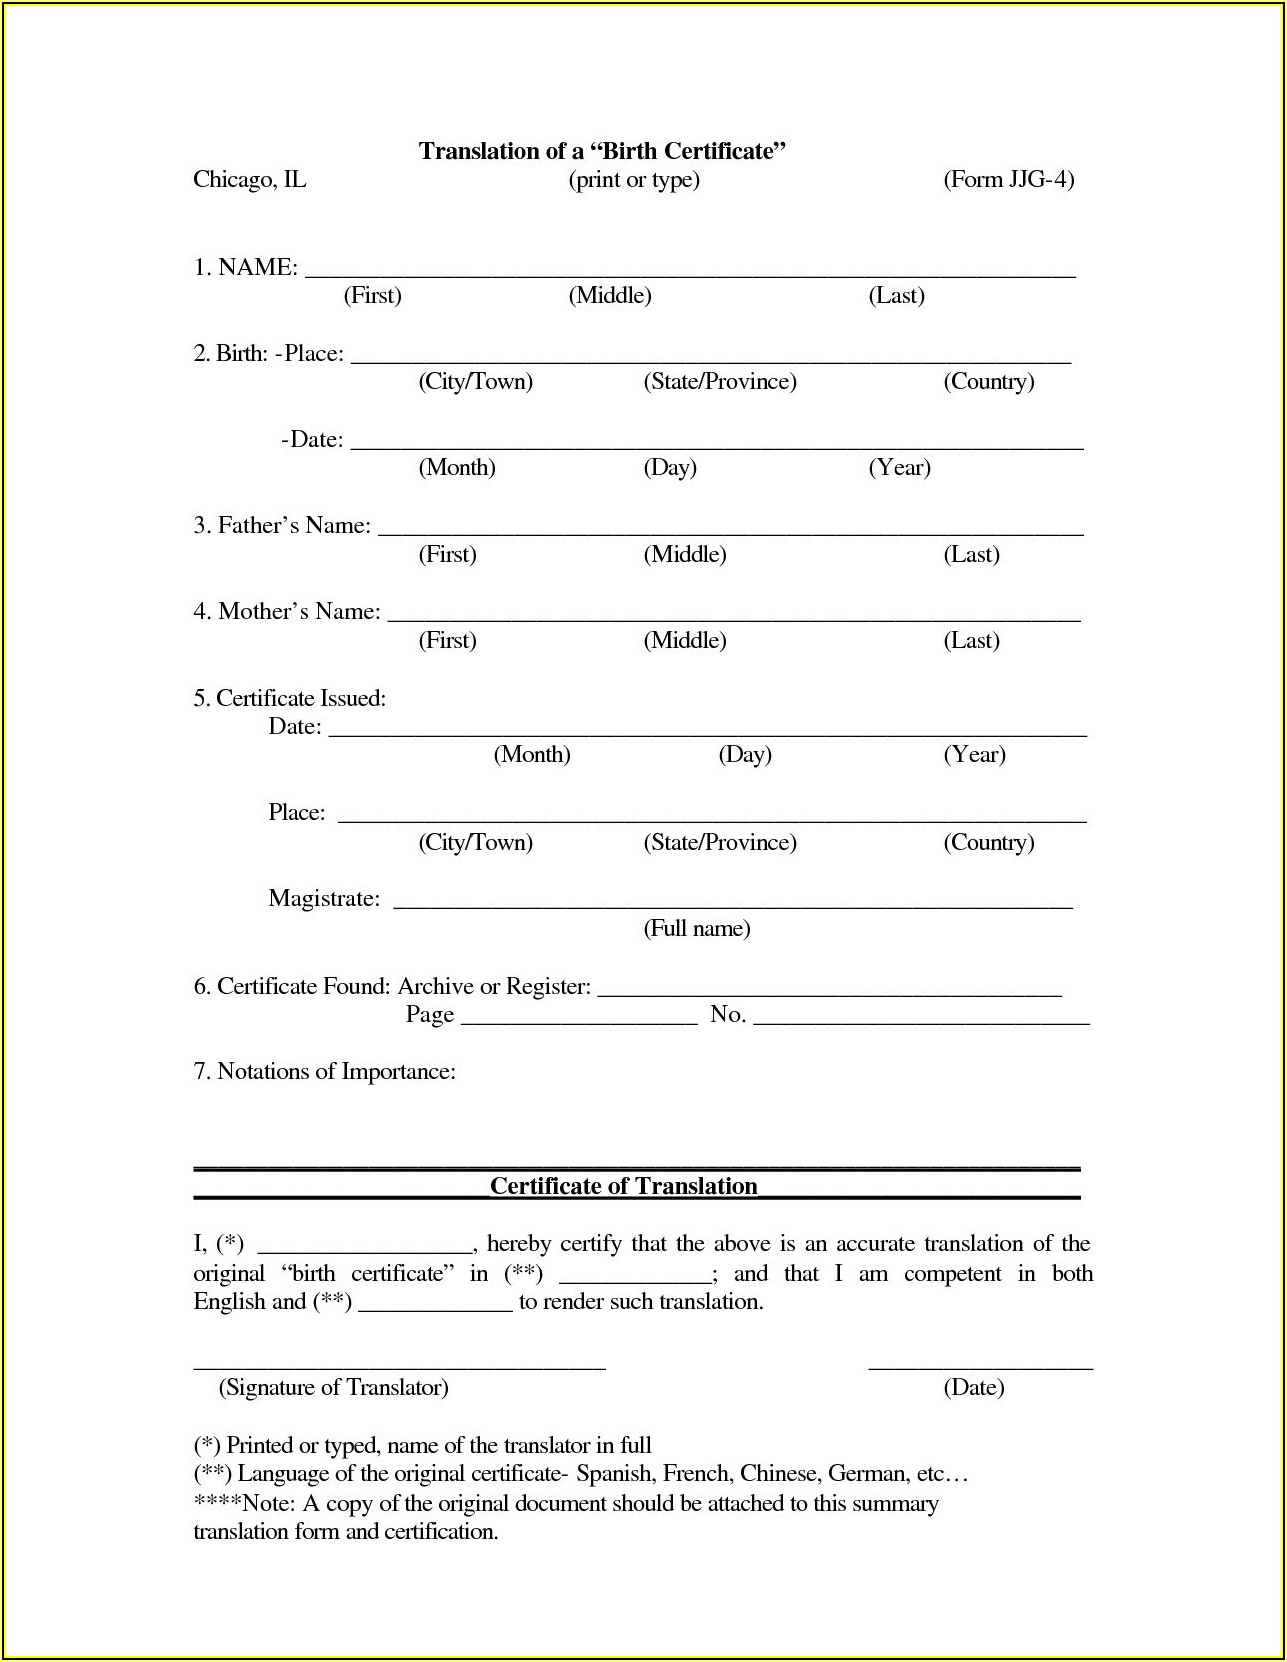 Marriage Certificate Translation Template Free